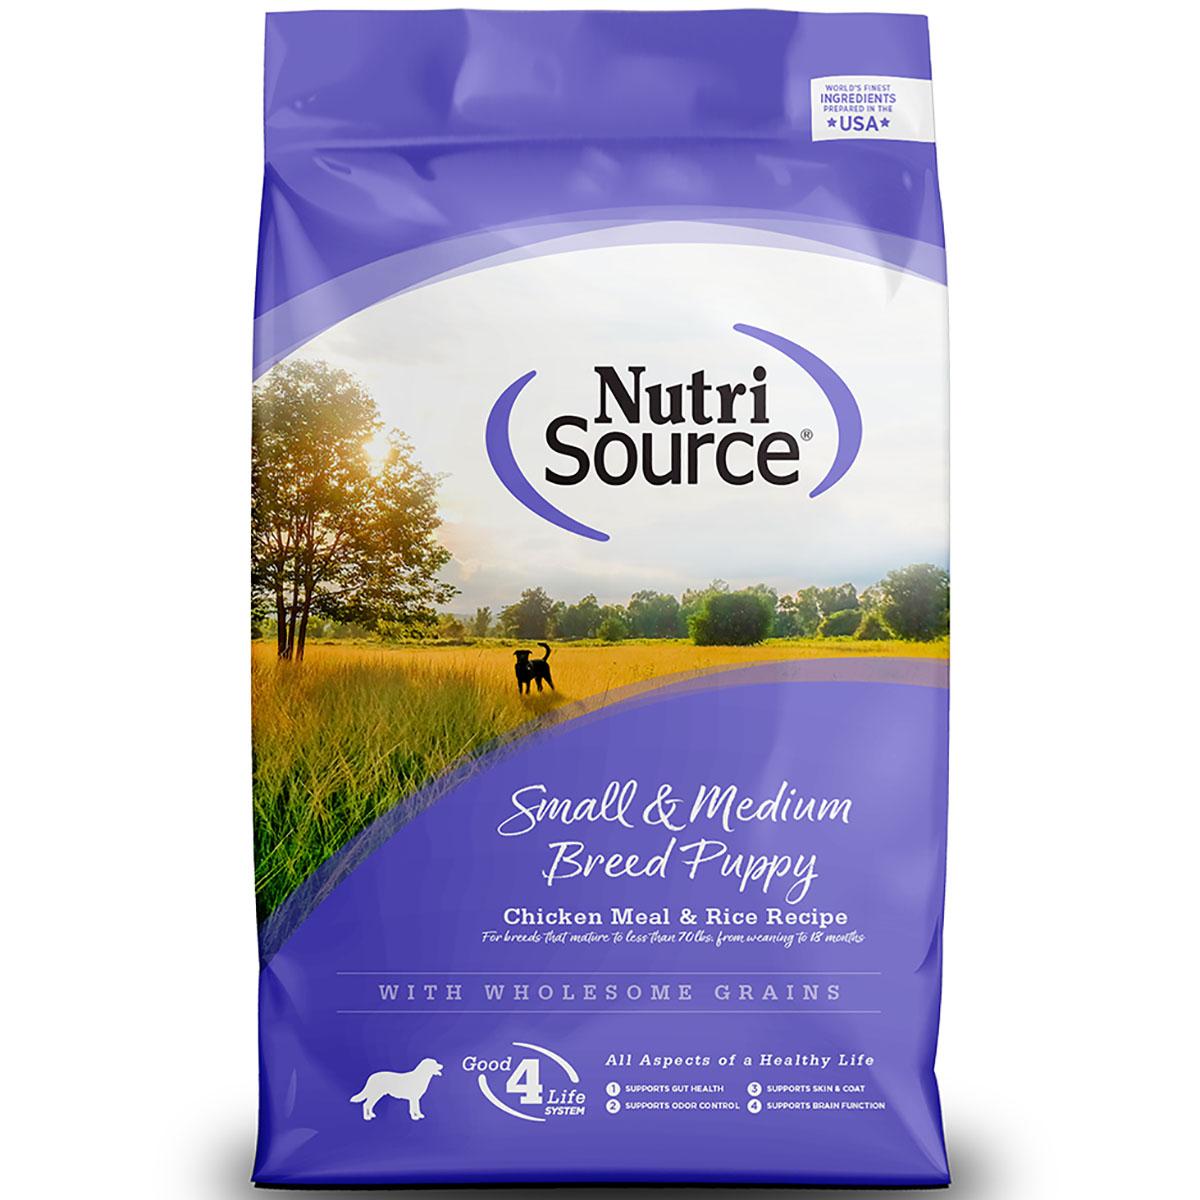 NutriSource Small & Medium Breed Puppy Chicken Meal & Rice Recipe Dry Dog Food